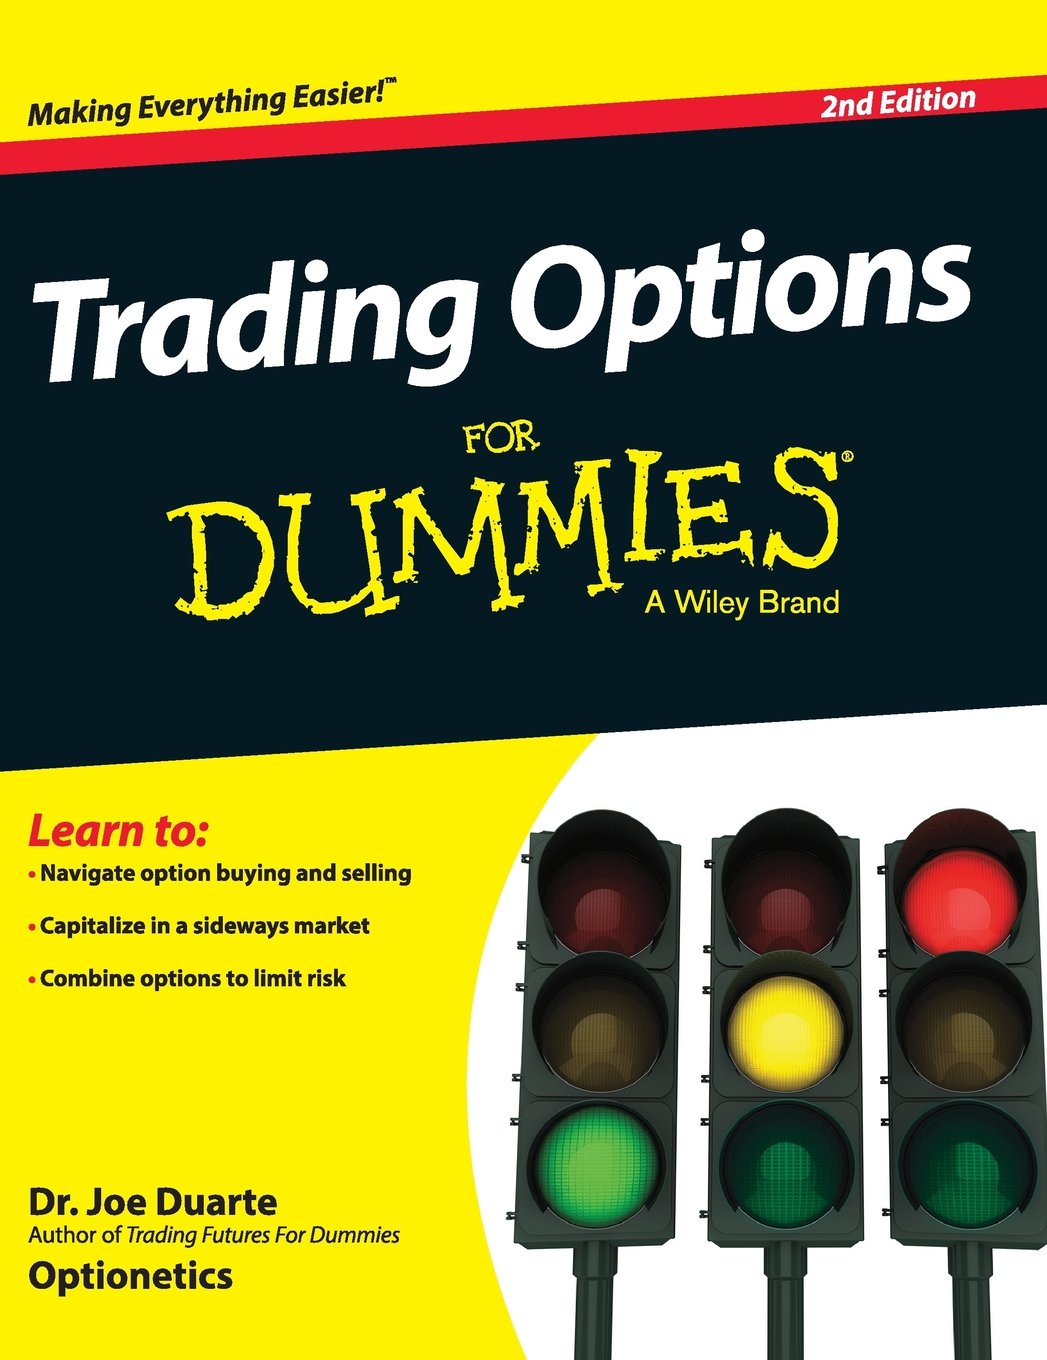 best options trading books, options trading books, option trading books, option trading, option strategy books, option books, follow the smart money book, follow the smart money, best options trading book, best option book, 